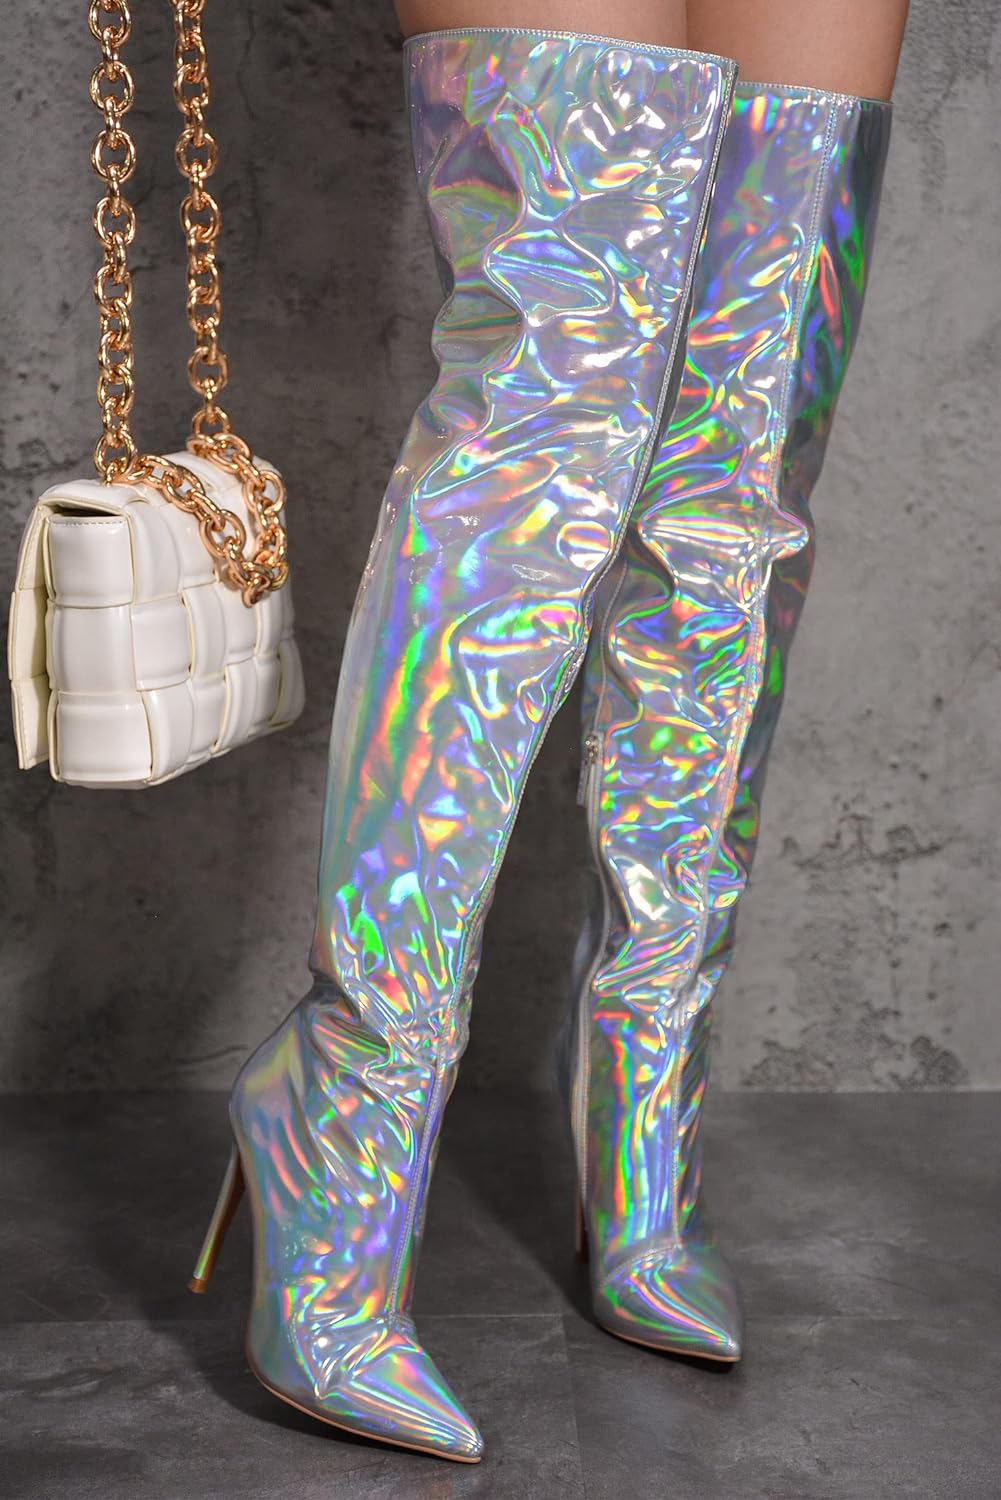 Metallic Fashion Style Silver Holographic Stiletto Over The Knee Boots